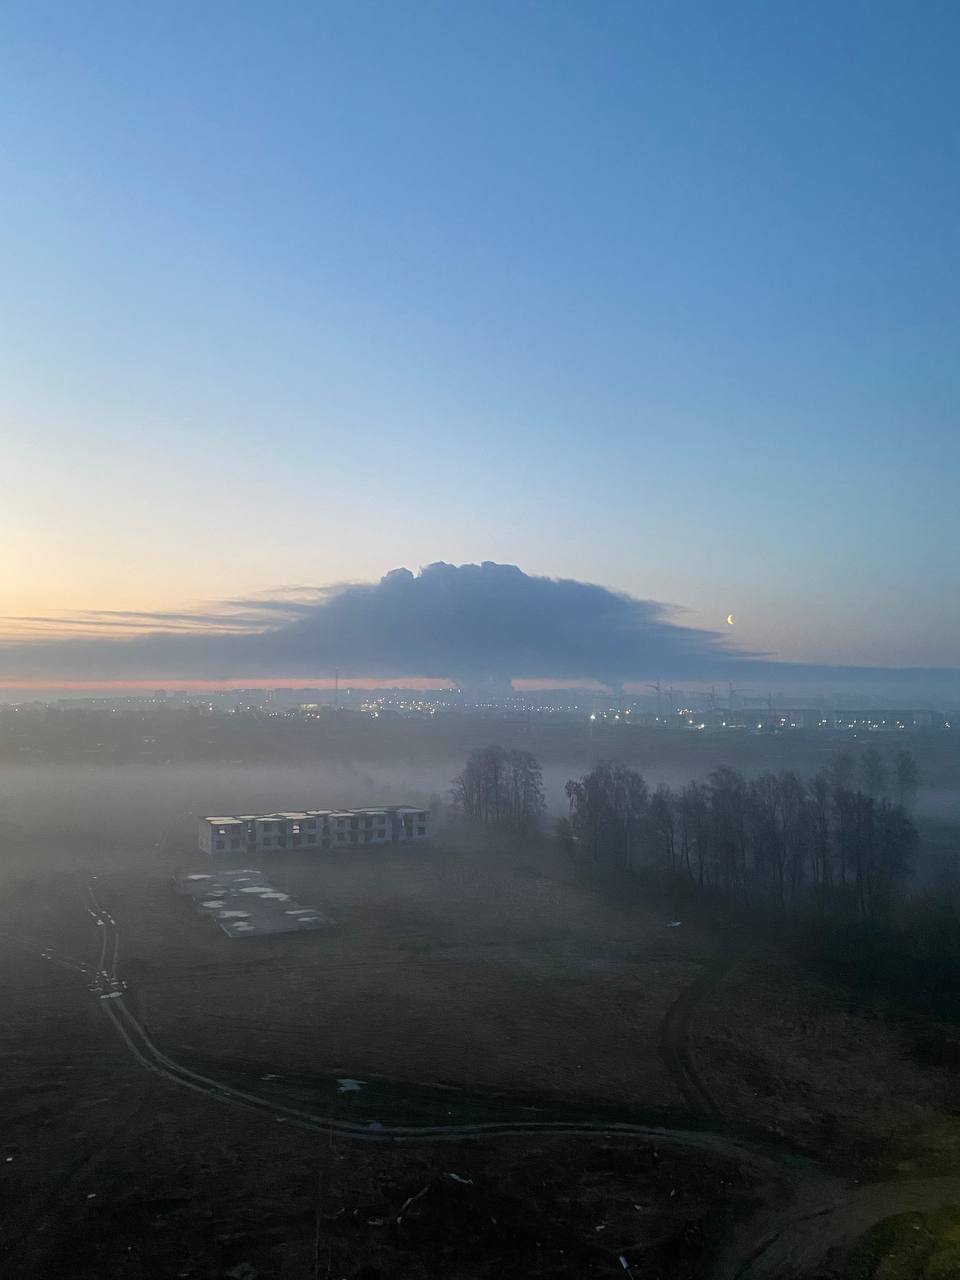 Justin Peden on Twitter: "Dawn in #Bryansk. Large, thick smoke plume  visible from 10+ kilometers away. https://t.co/nd5NCzkS6Y" / Twitter